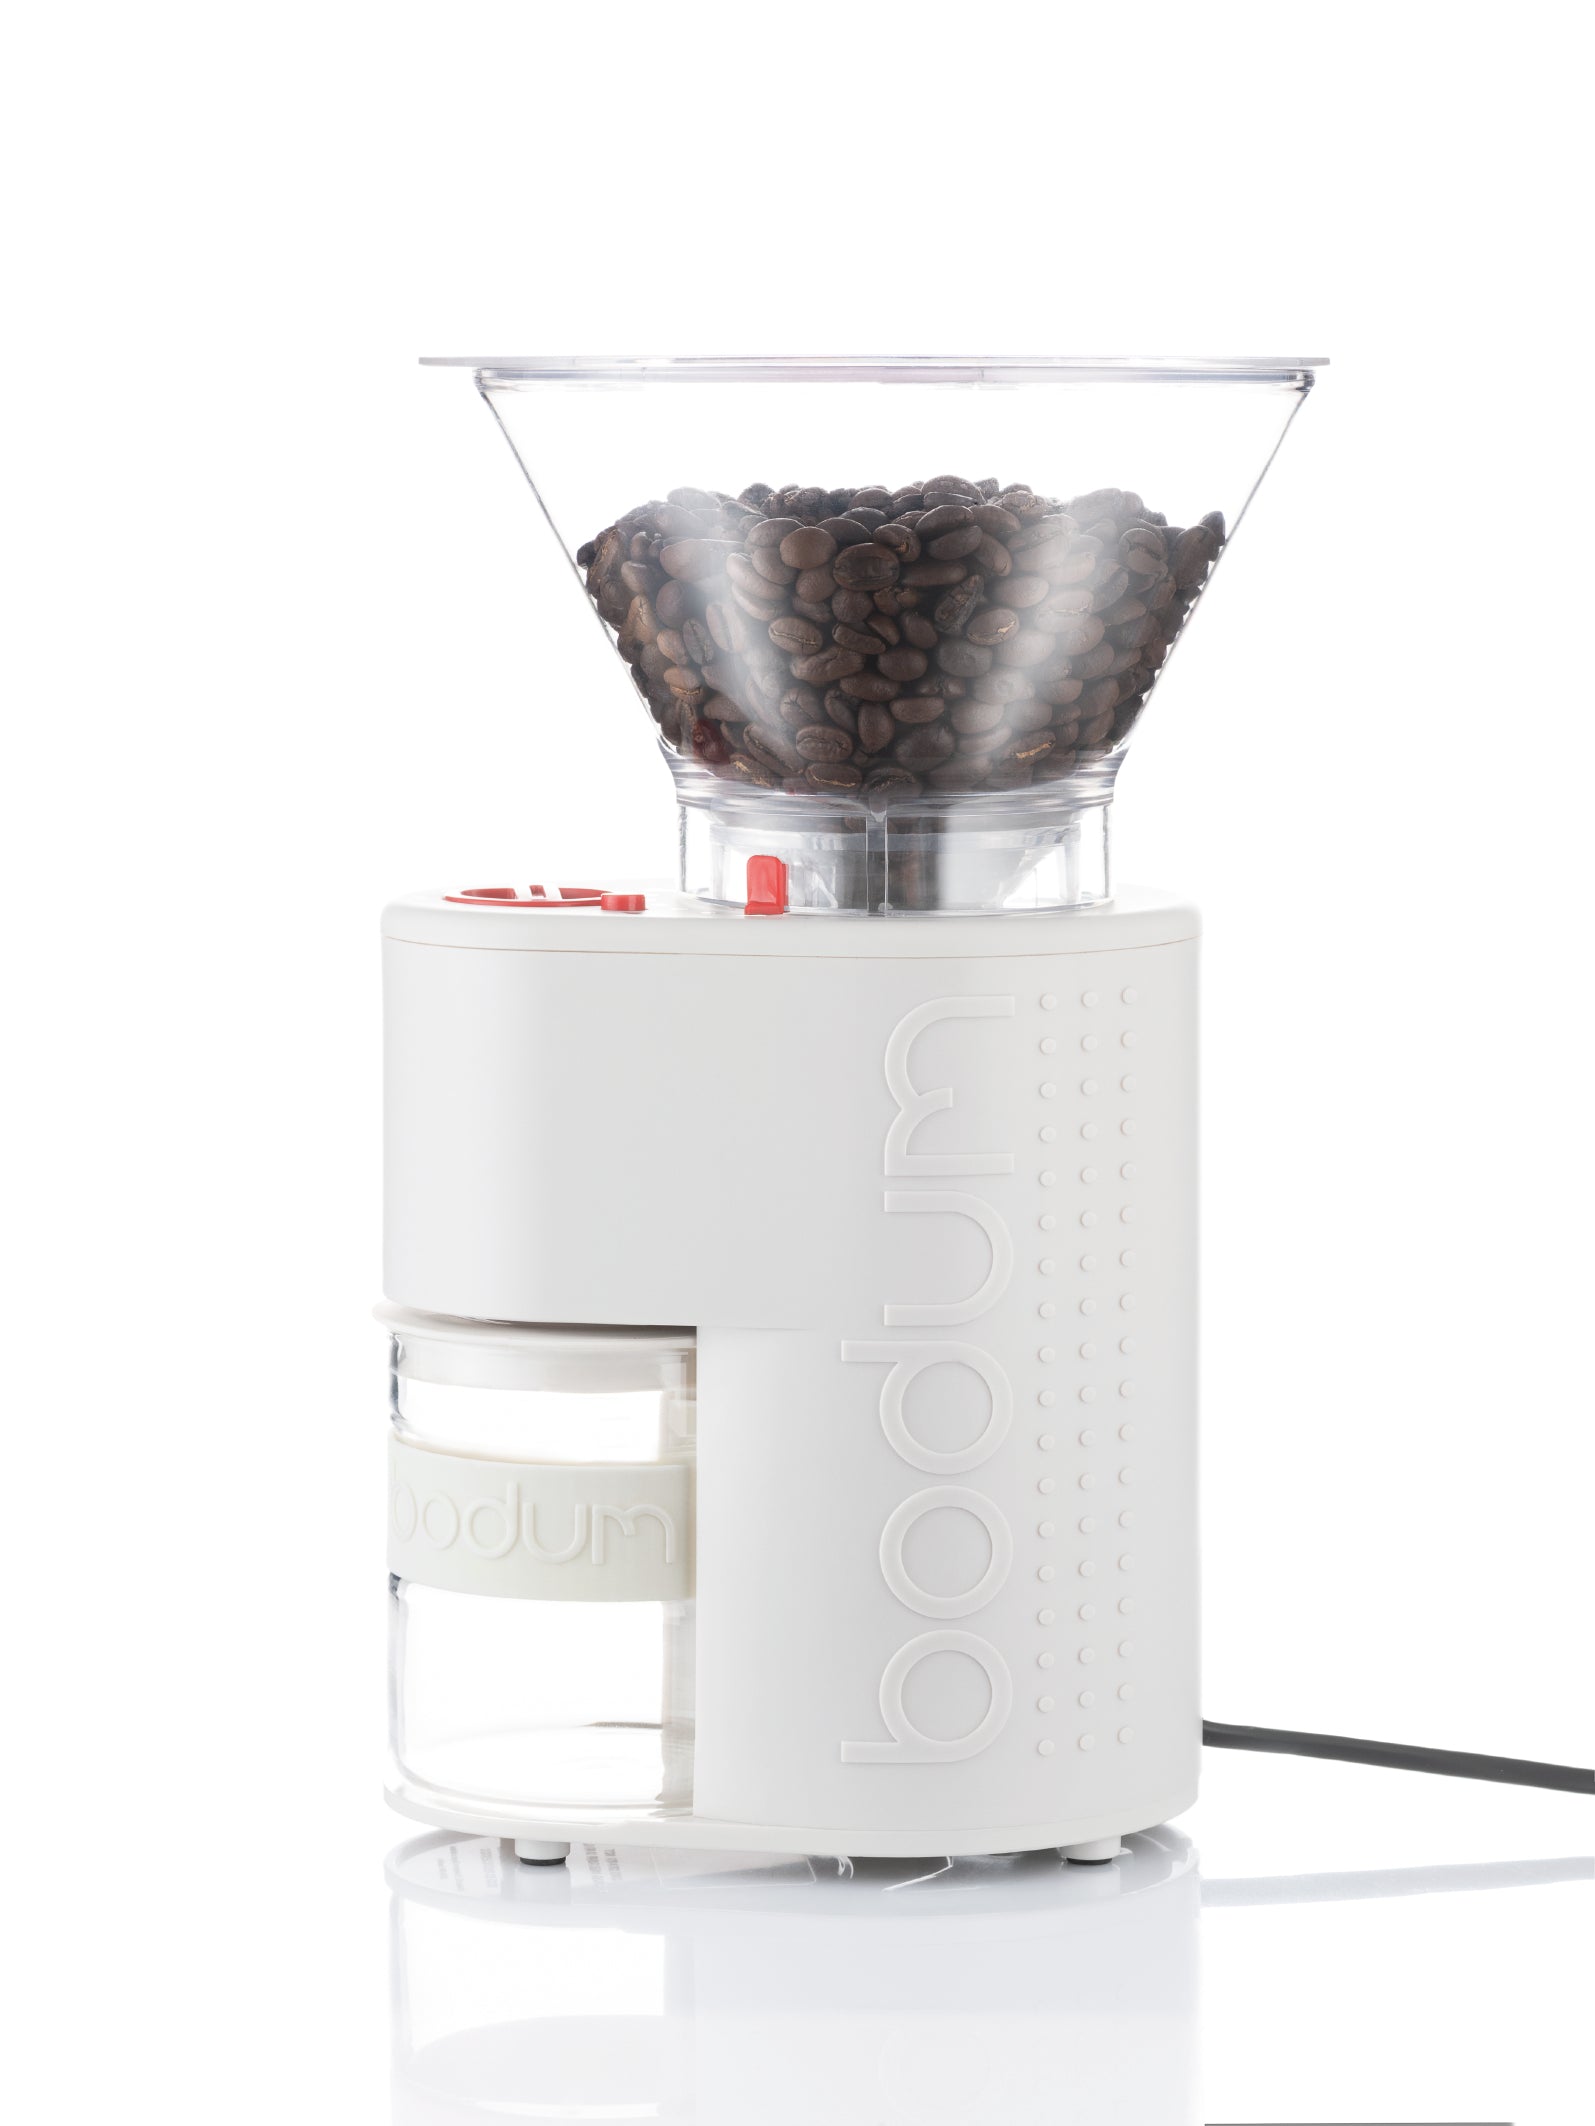 French Press Coffee Using The Krups Silent Vortex Coffee Grinder. 